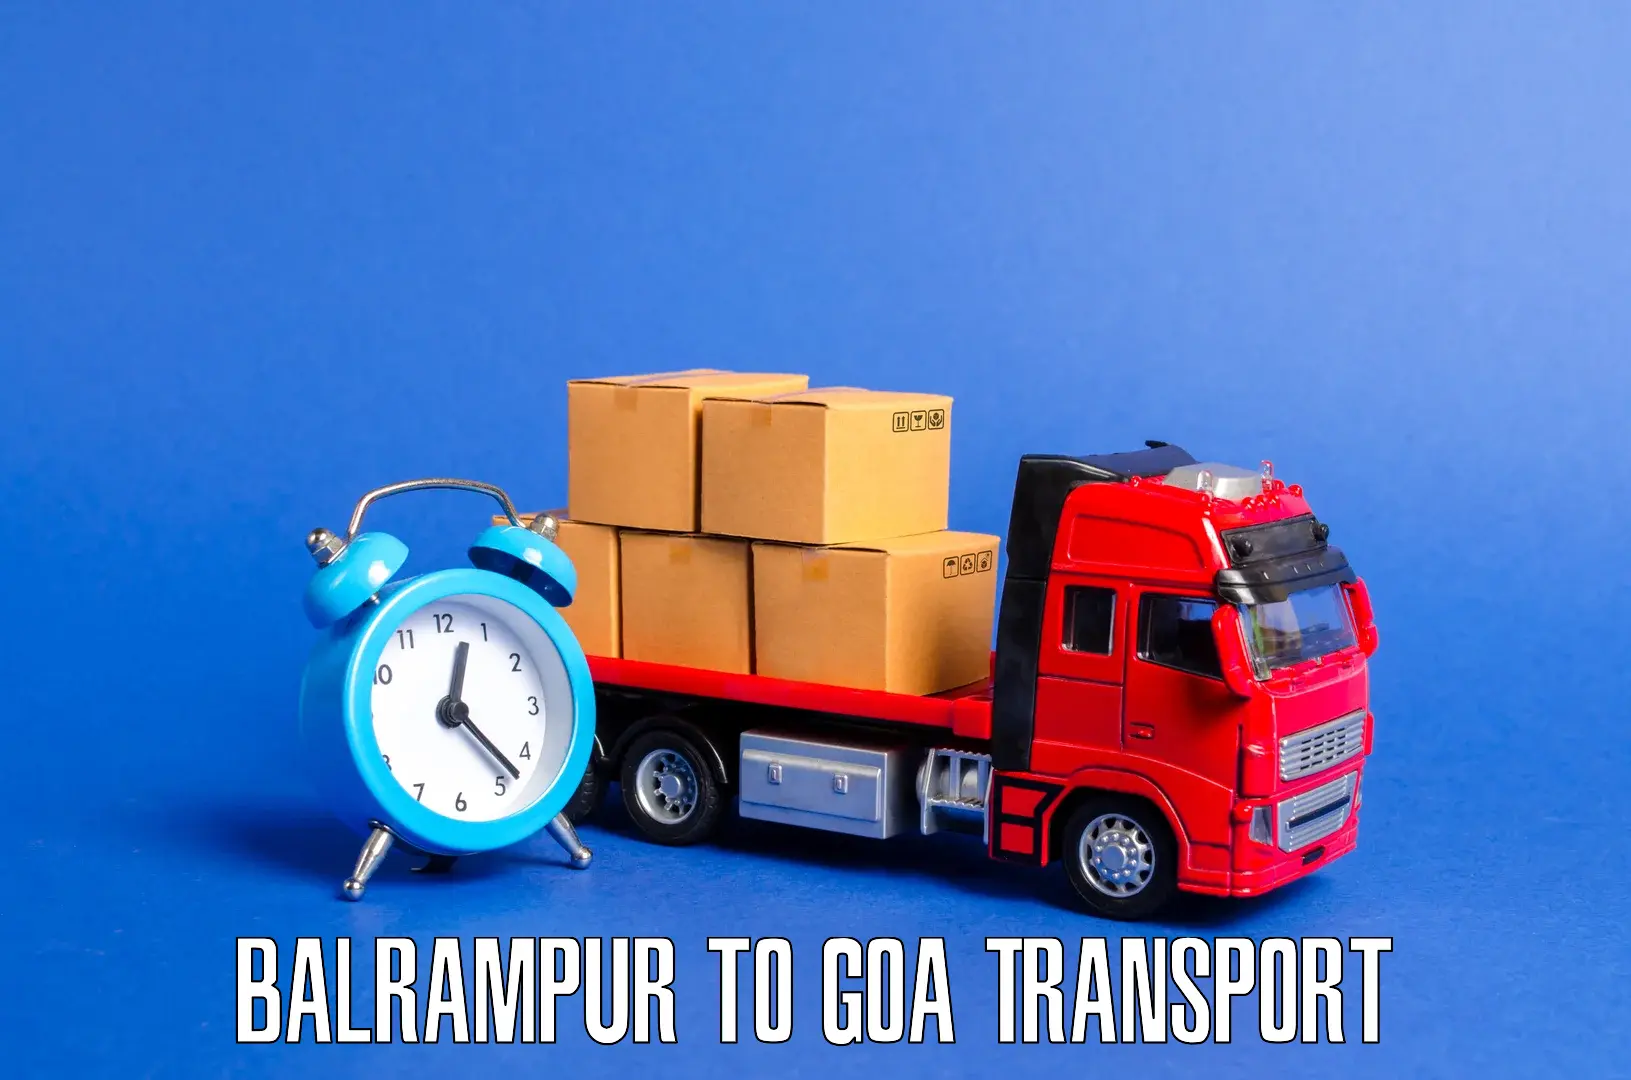 All India transport service Balrampur to Bardez